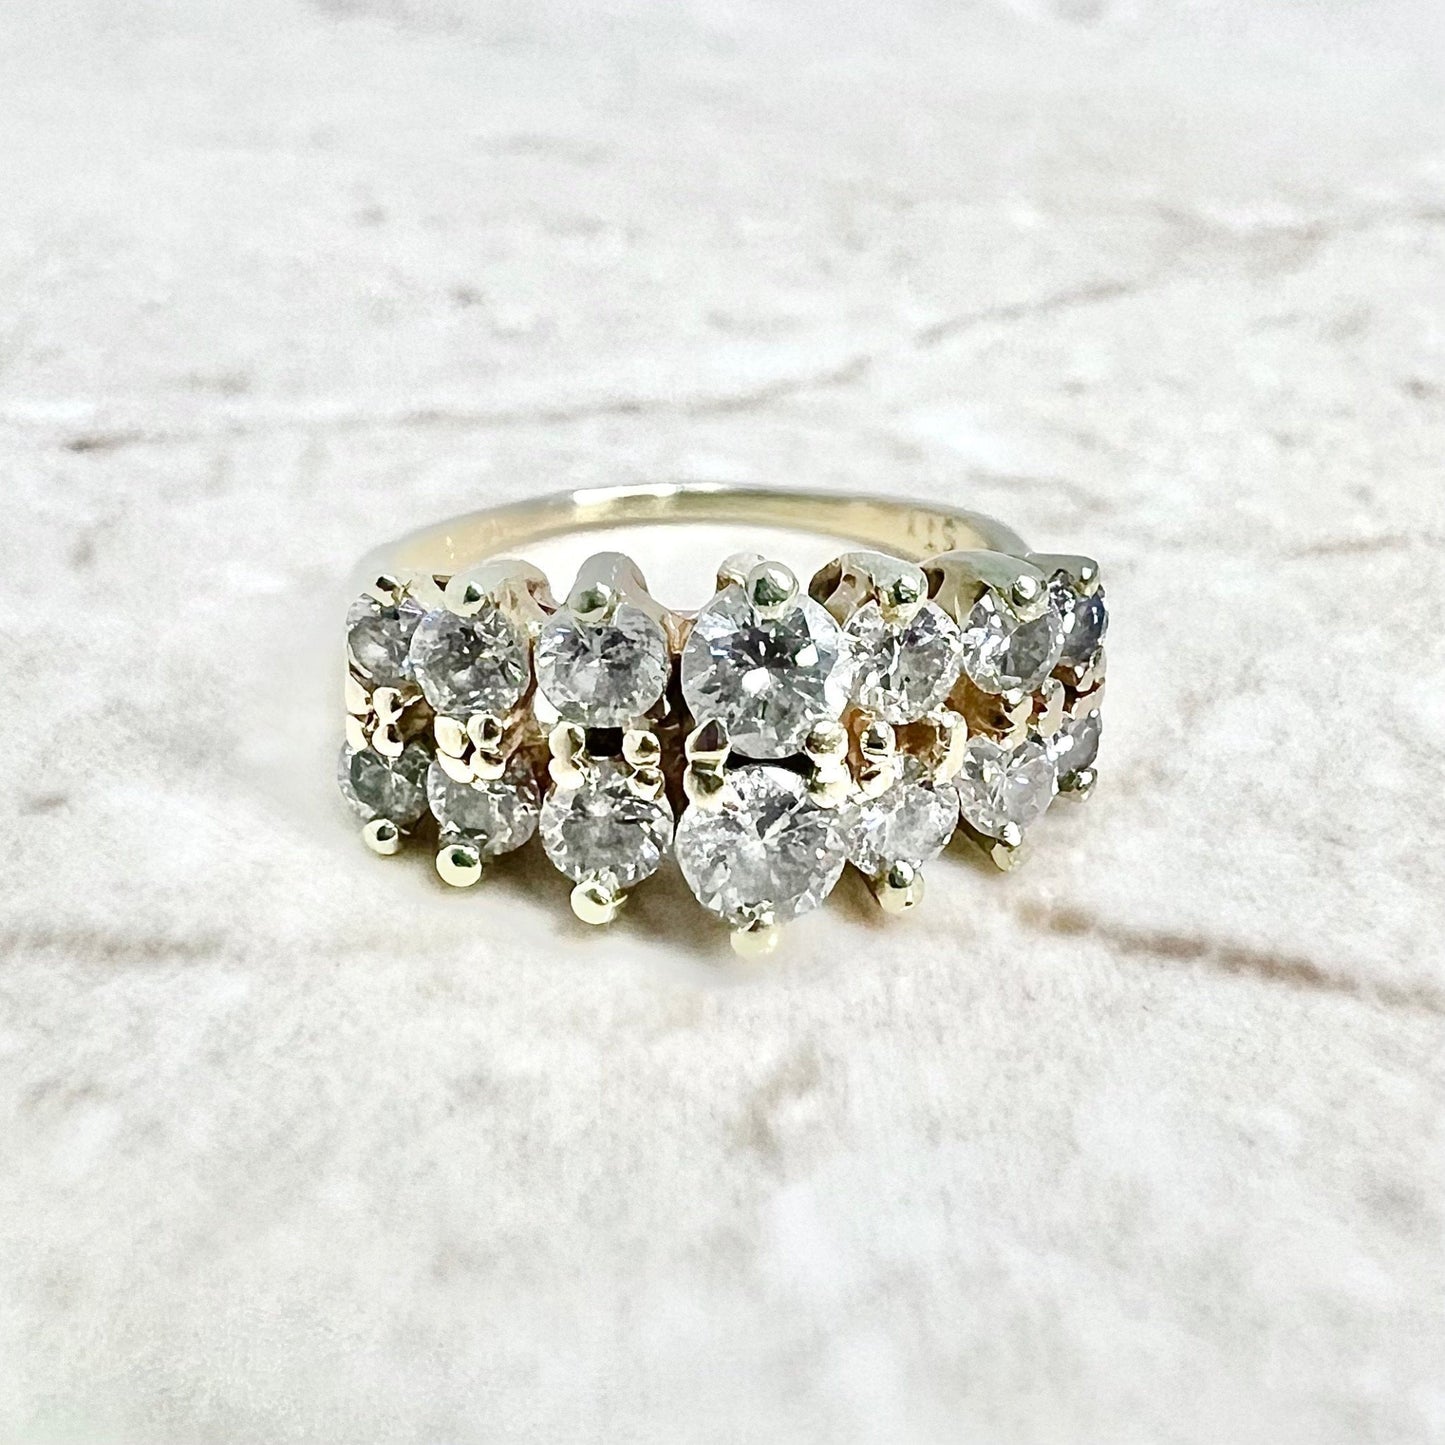 0.90 CTTW Vintage 14K Double Row Diamond Band Ring - Yellow Gold Diamond Ring - Diamond Wedding Ring - Anniversary Ring - Best Gifts For Her